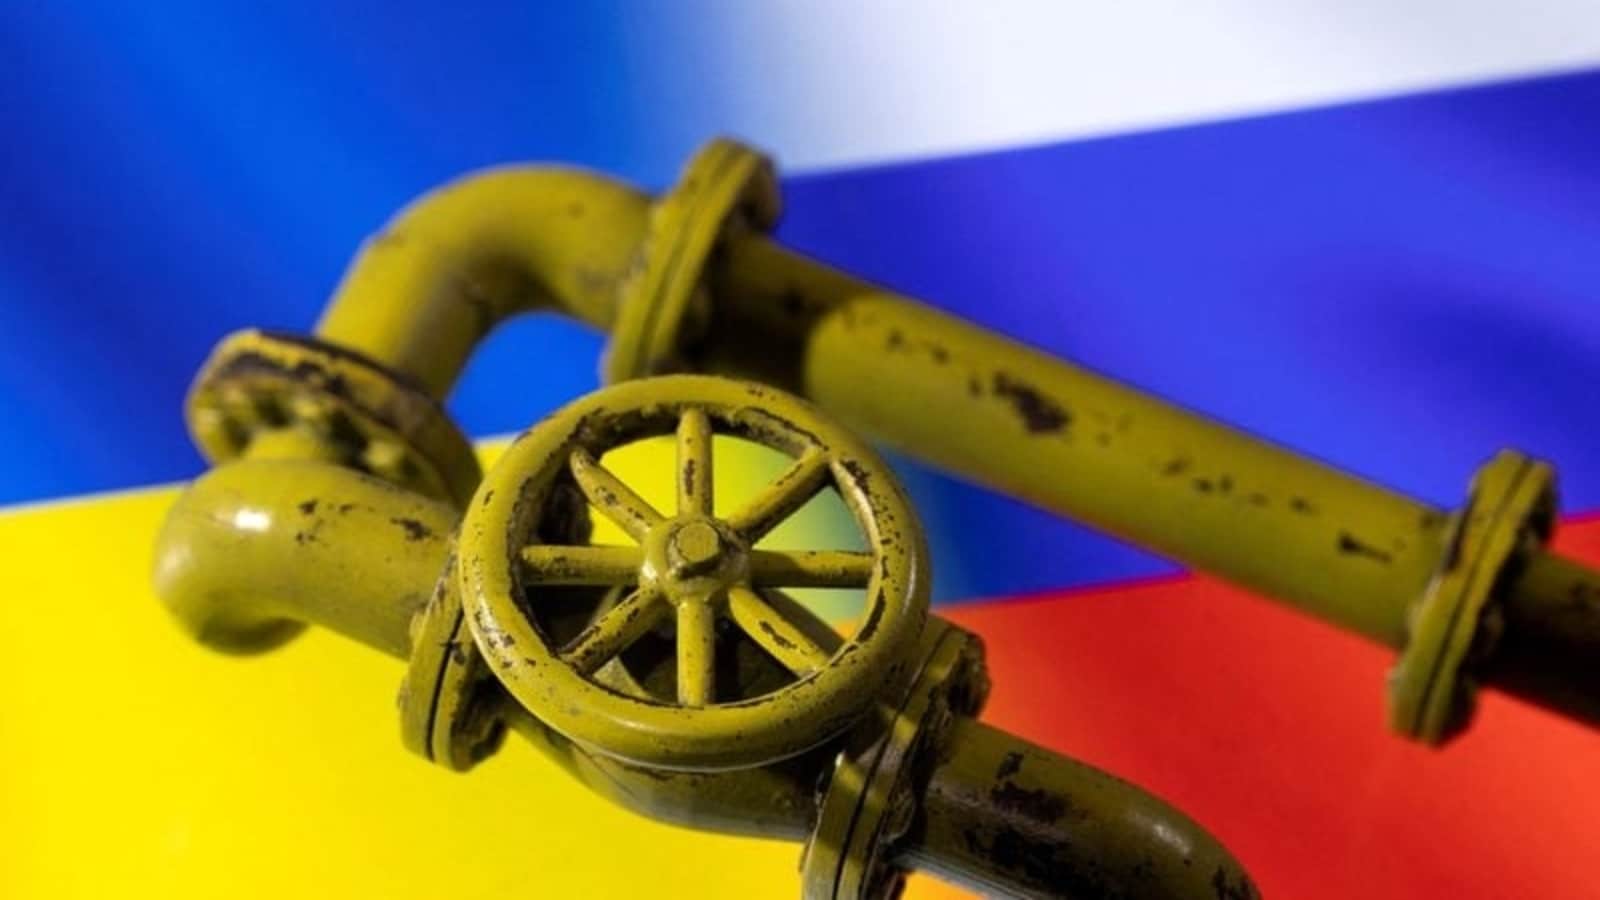 US natural gas prices at 13-year high as Ukraine war creates global supply crunch